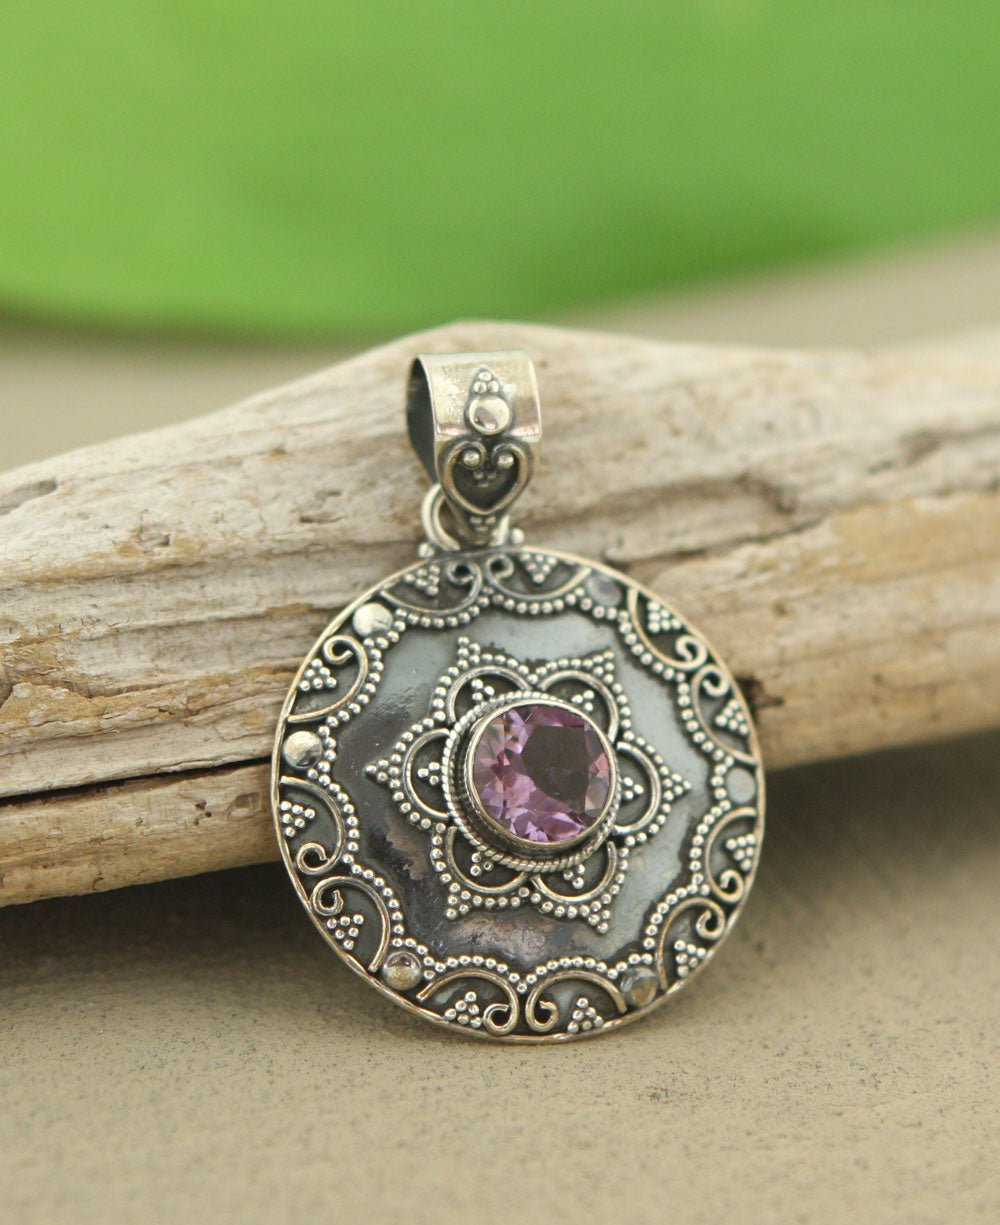 Indian Metalwork Pendant with Amethyst, Sterling Silver - Charms & Pendants